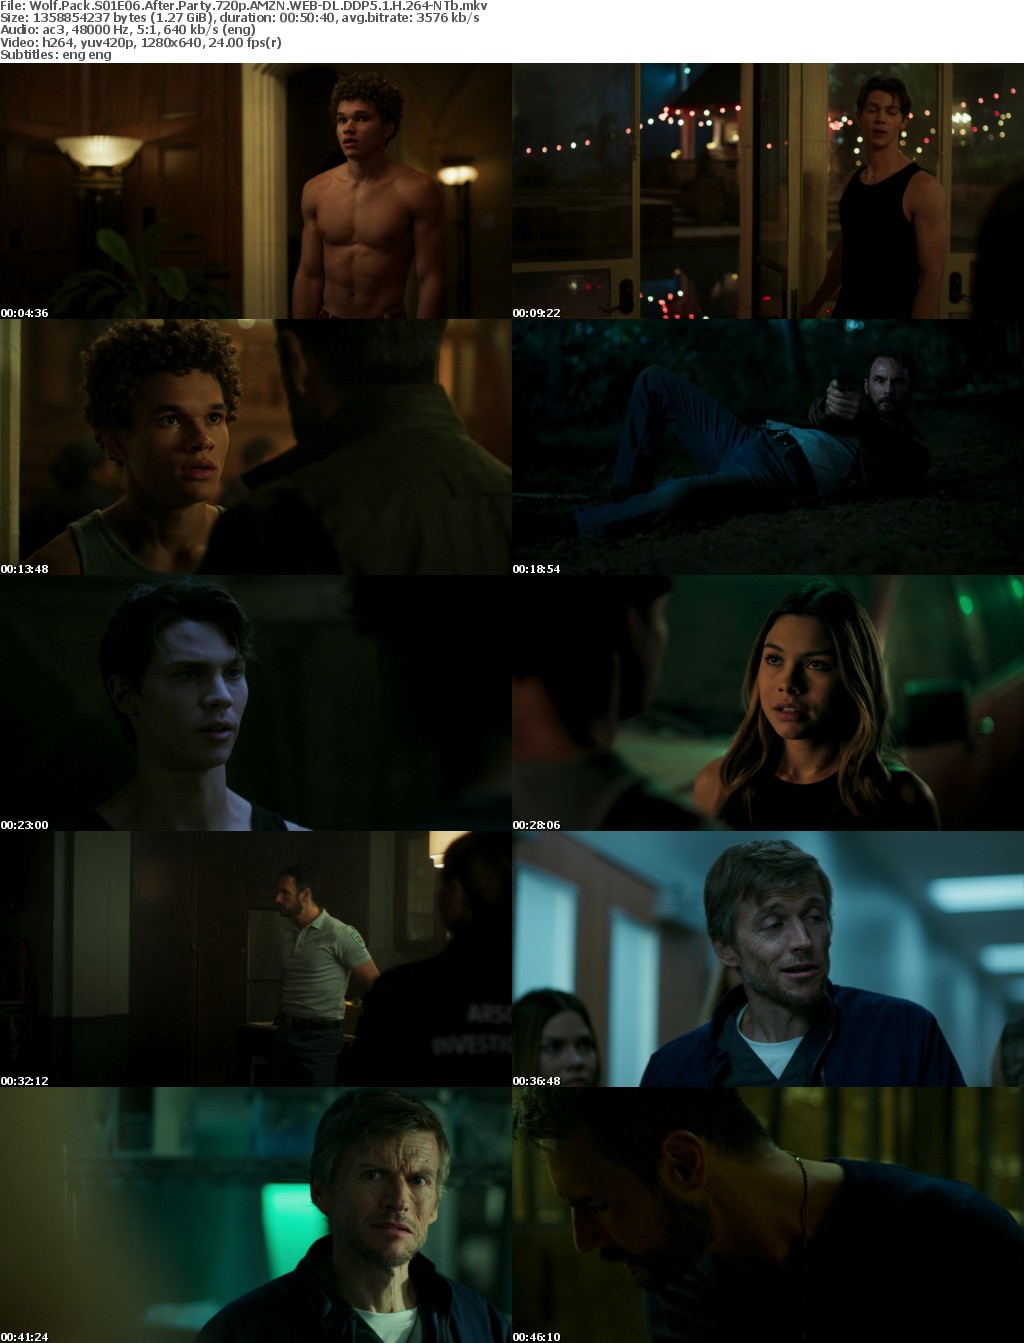 Wolf Pack S01E06 After Party 720p AMZN WEBRip DDP5 1 x264-NTb